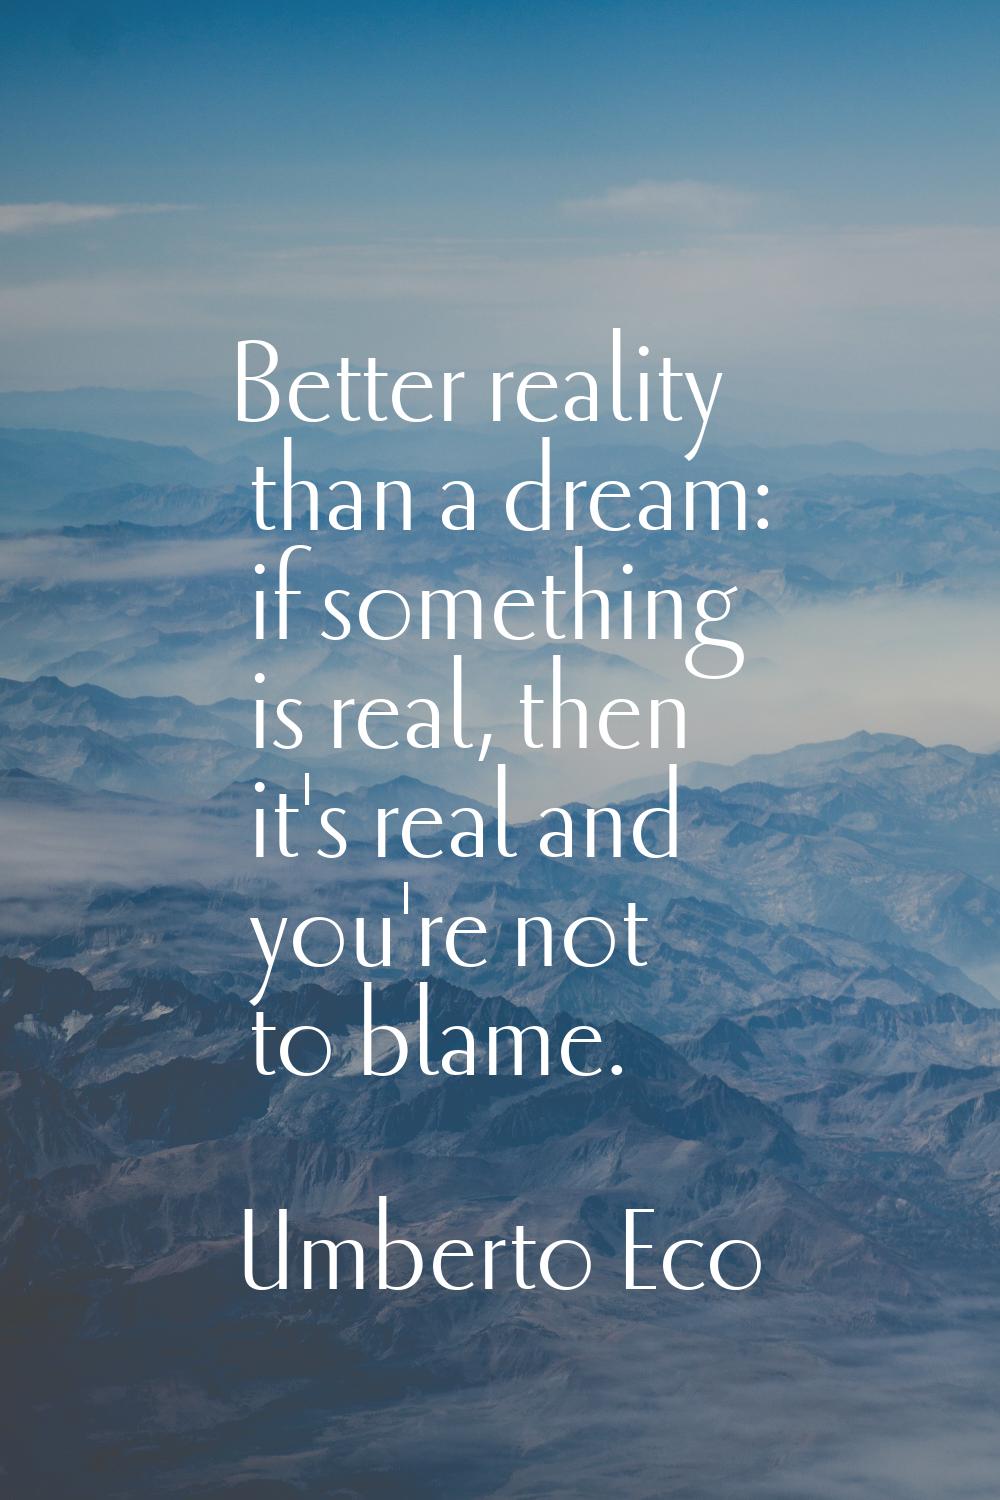 Better reality than a dream: if something is real, then it's real and you're not to blame.